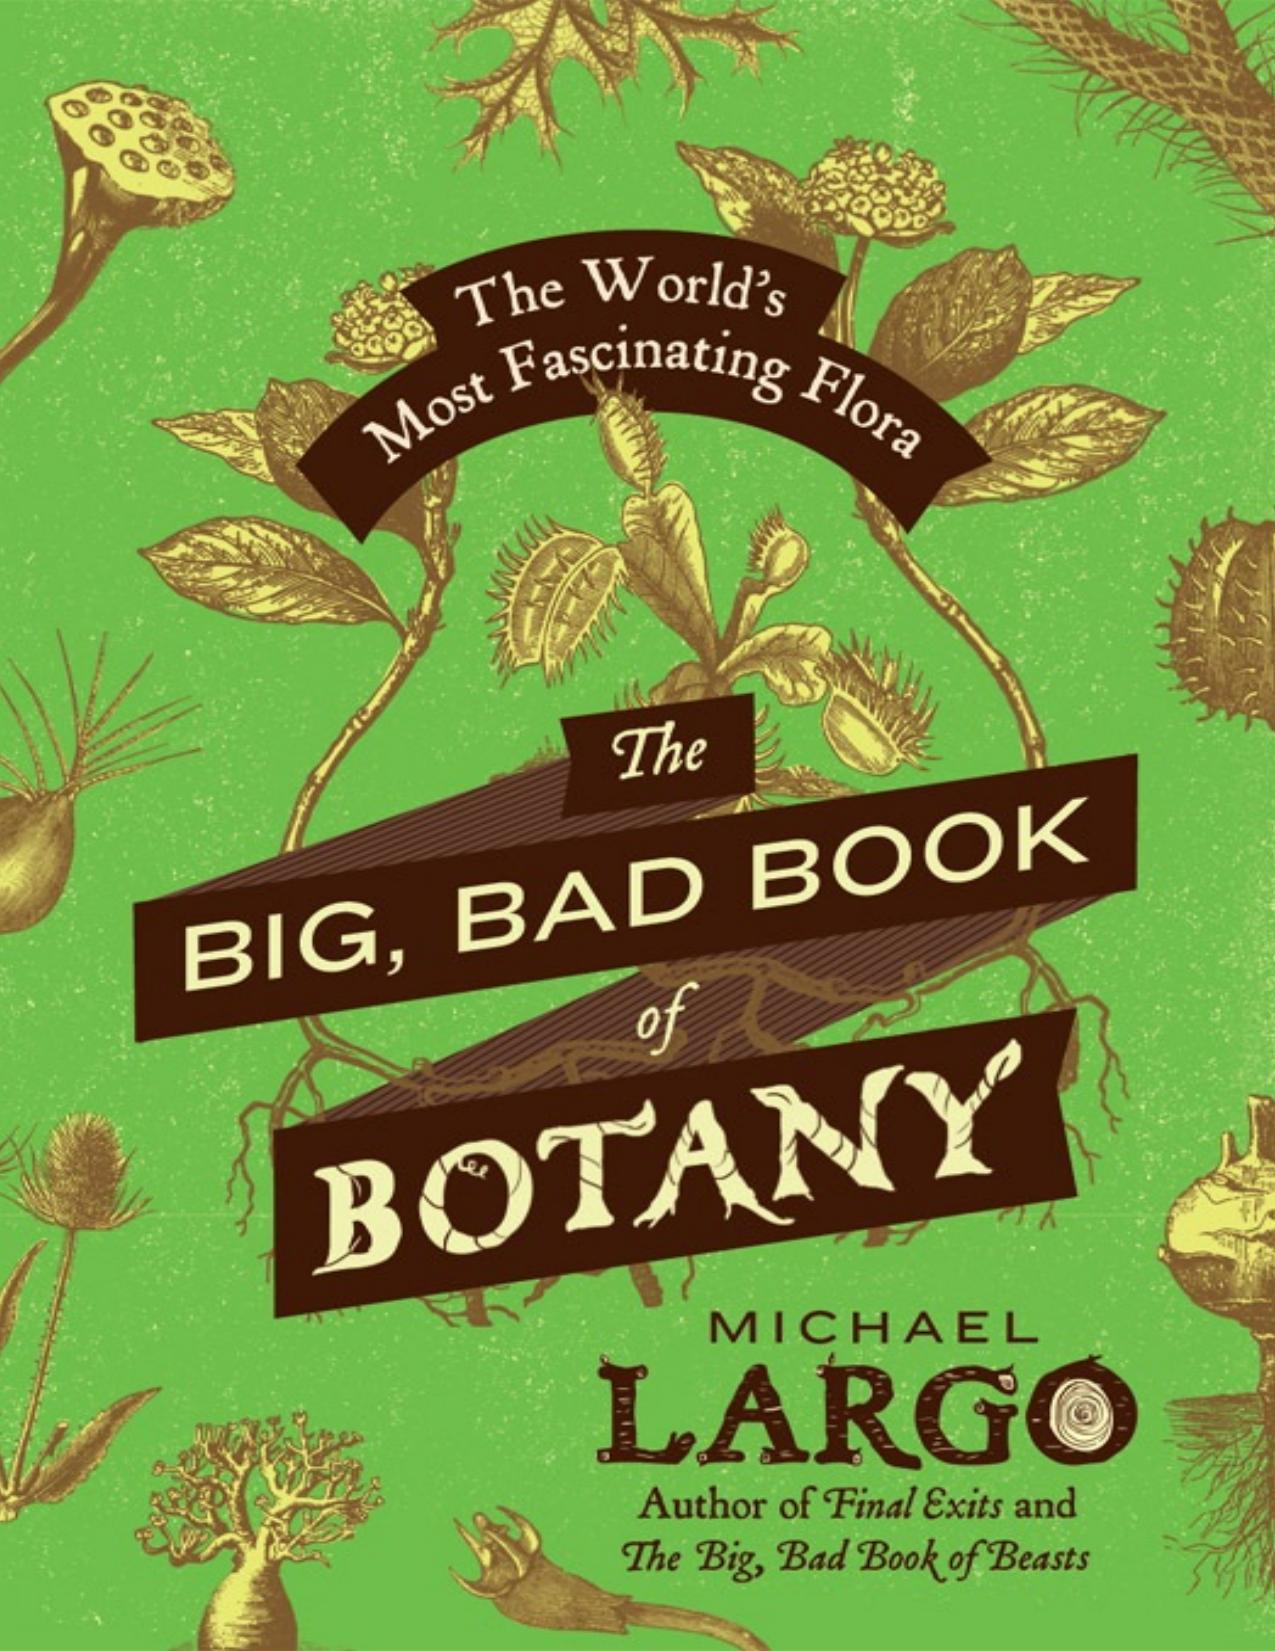 The Big, Bad Book of Botany: The World\'s Most Fascinating Flora - PDFDrive.com